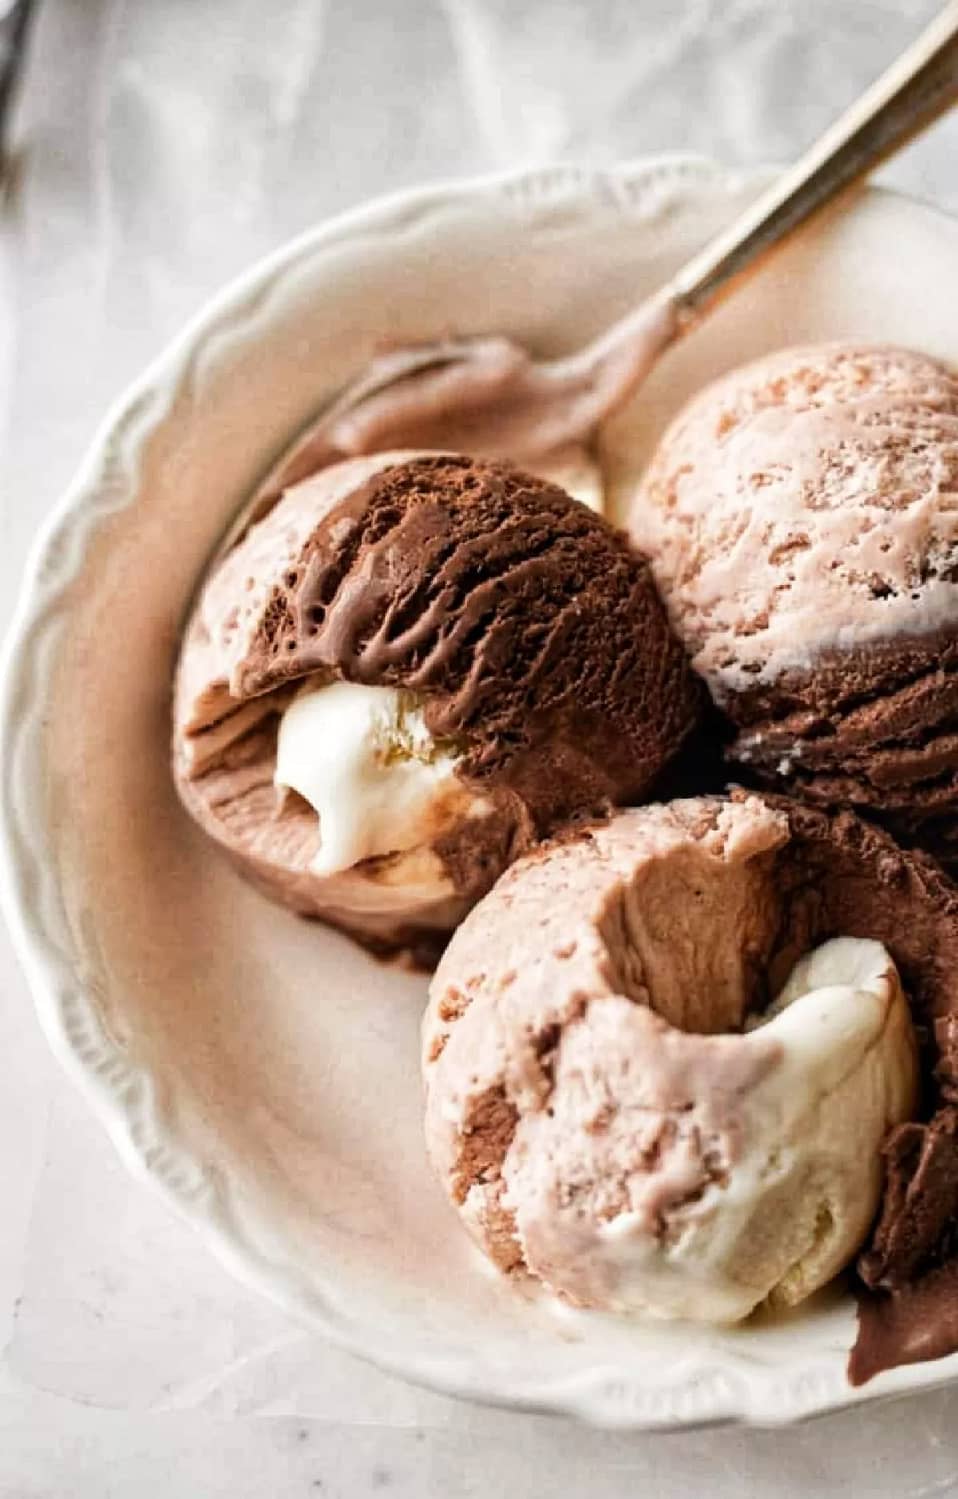 A hot afternoon Is complete with this easy homemade Neapolitan ice cream. This easy ice cream recipe is perfect for summer parties and It makes the perfect ending for a hot day after dinner